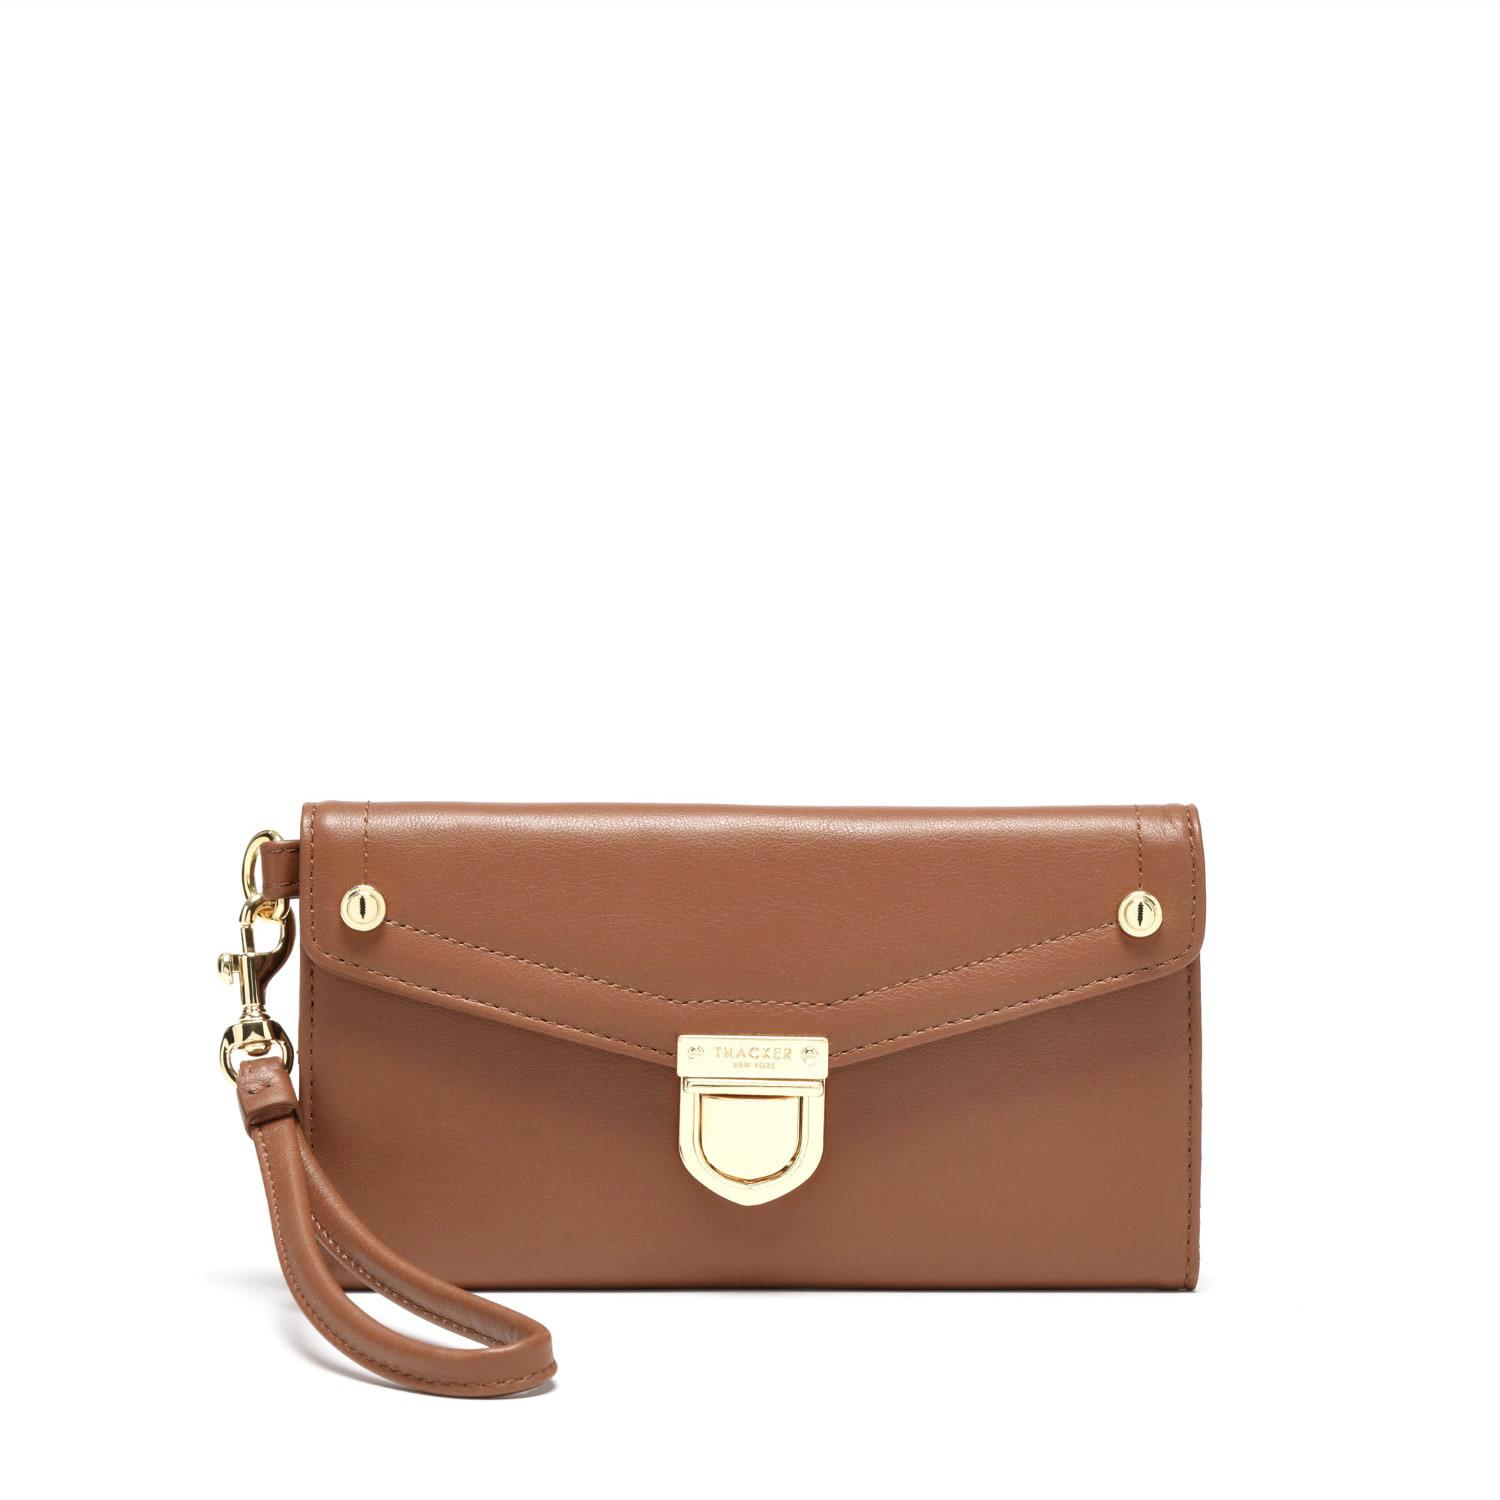 Lyst - Thacker Nyc Paola Clutch Wallet In Cognac & Gold in Brown